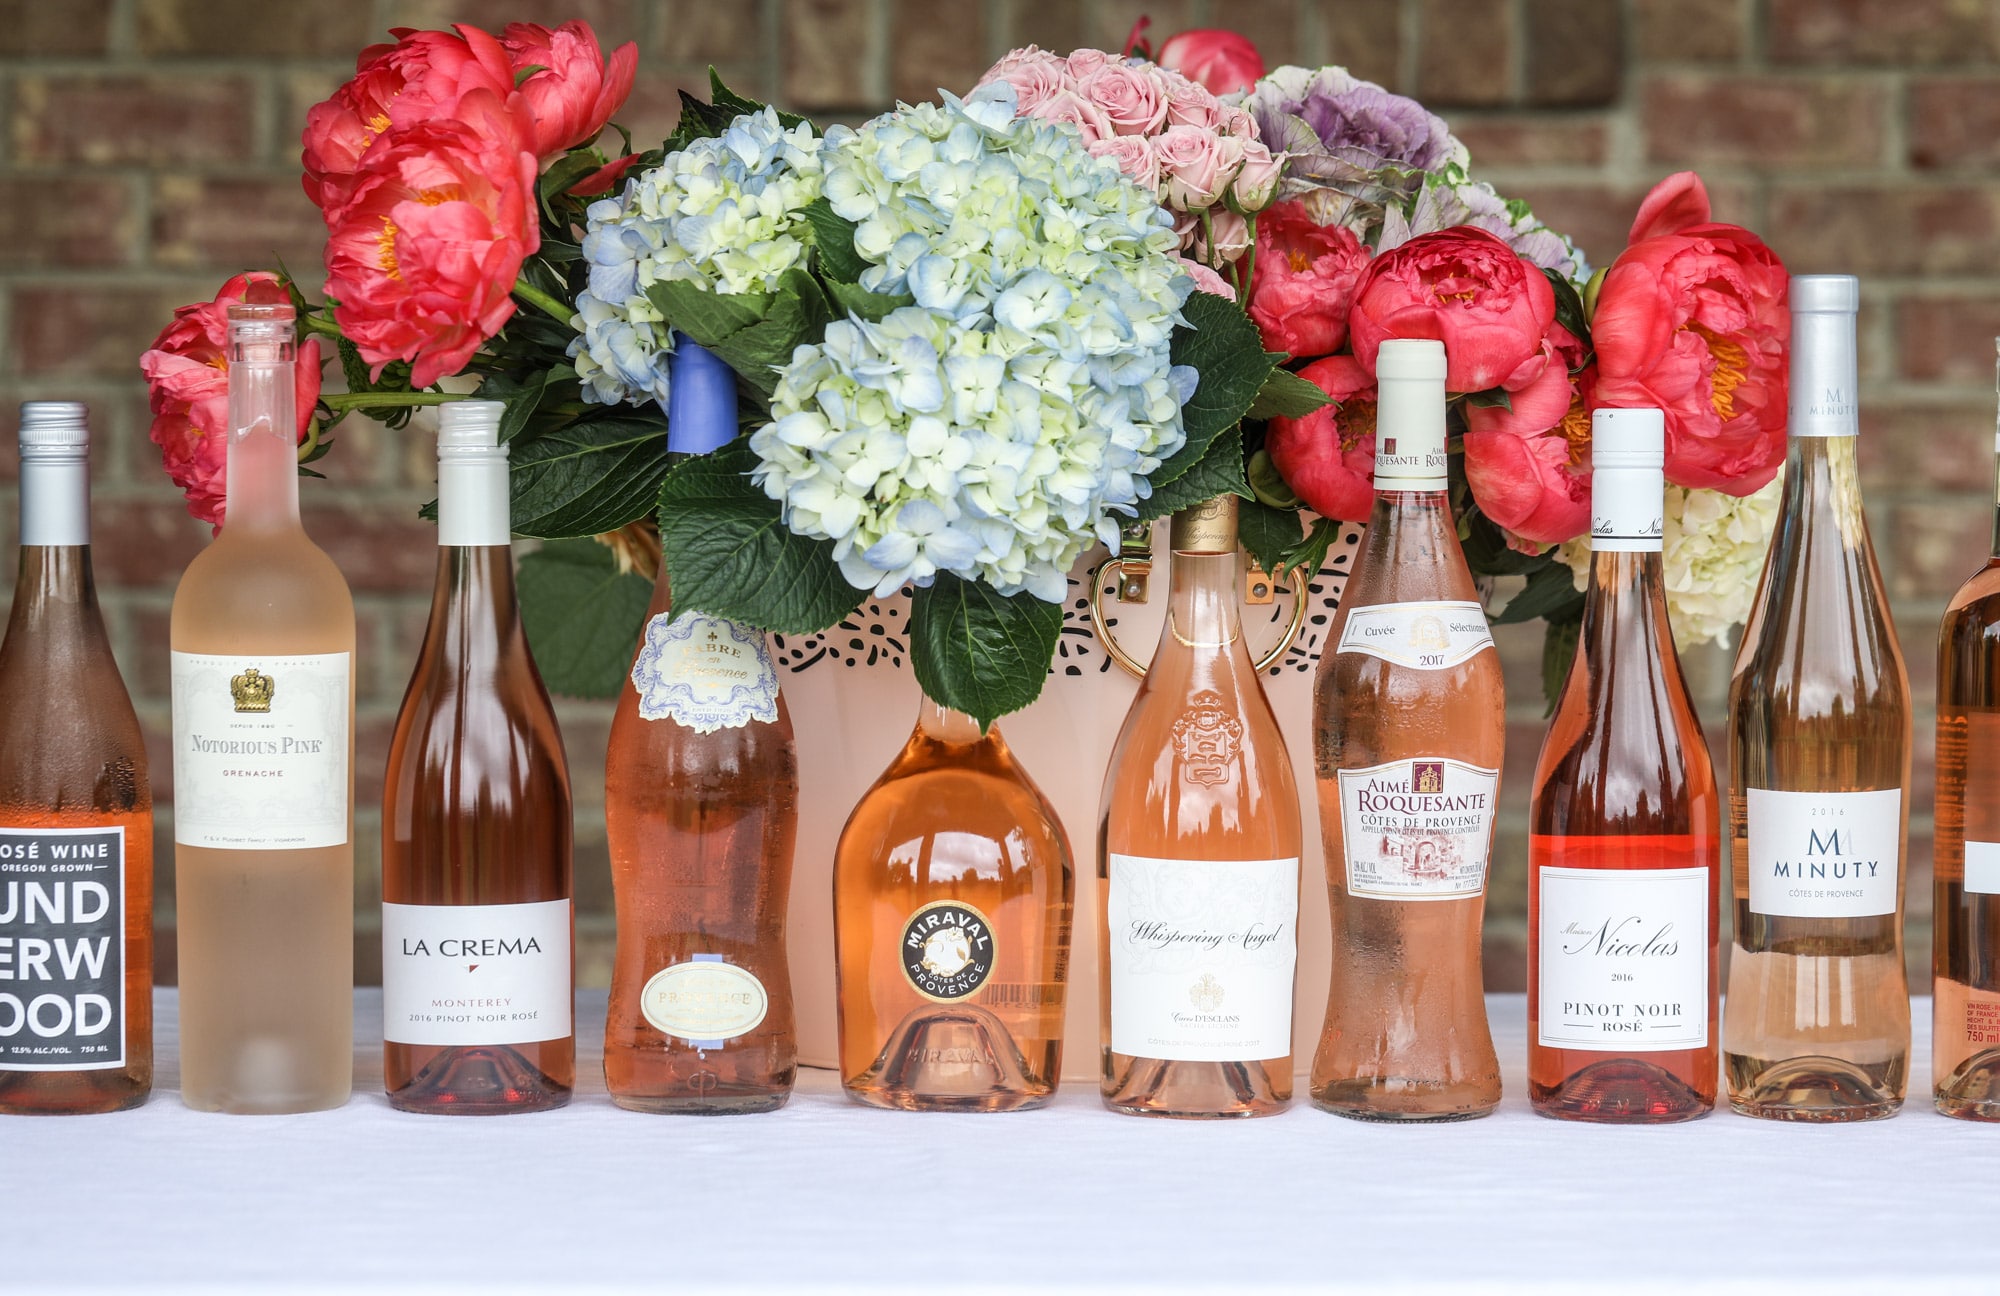 The best rosé to drink - all here in one epic summer guide for you! I'm sharing my personal favorite top ten rosé wines to drink in summer 2018, along with the perfect cheese board and snacks to go with. I howsweeteats.com #rosé #rose #summer #2018 #cheeseboard 